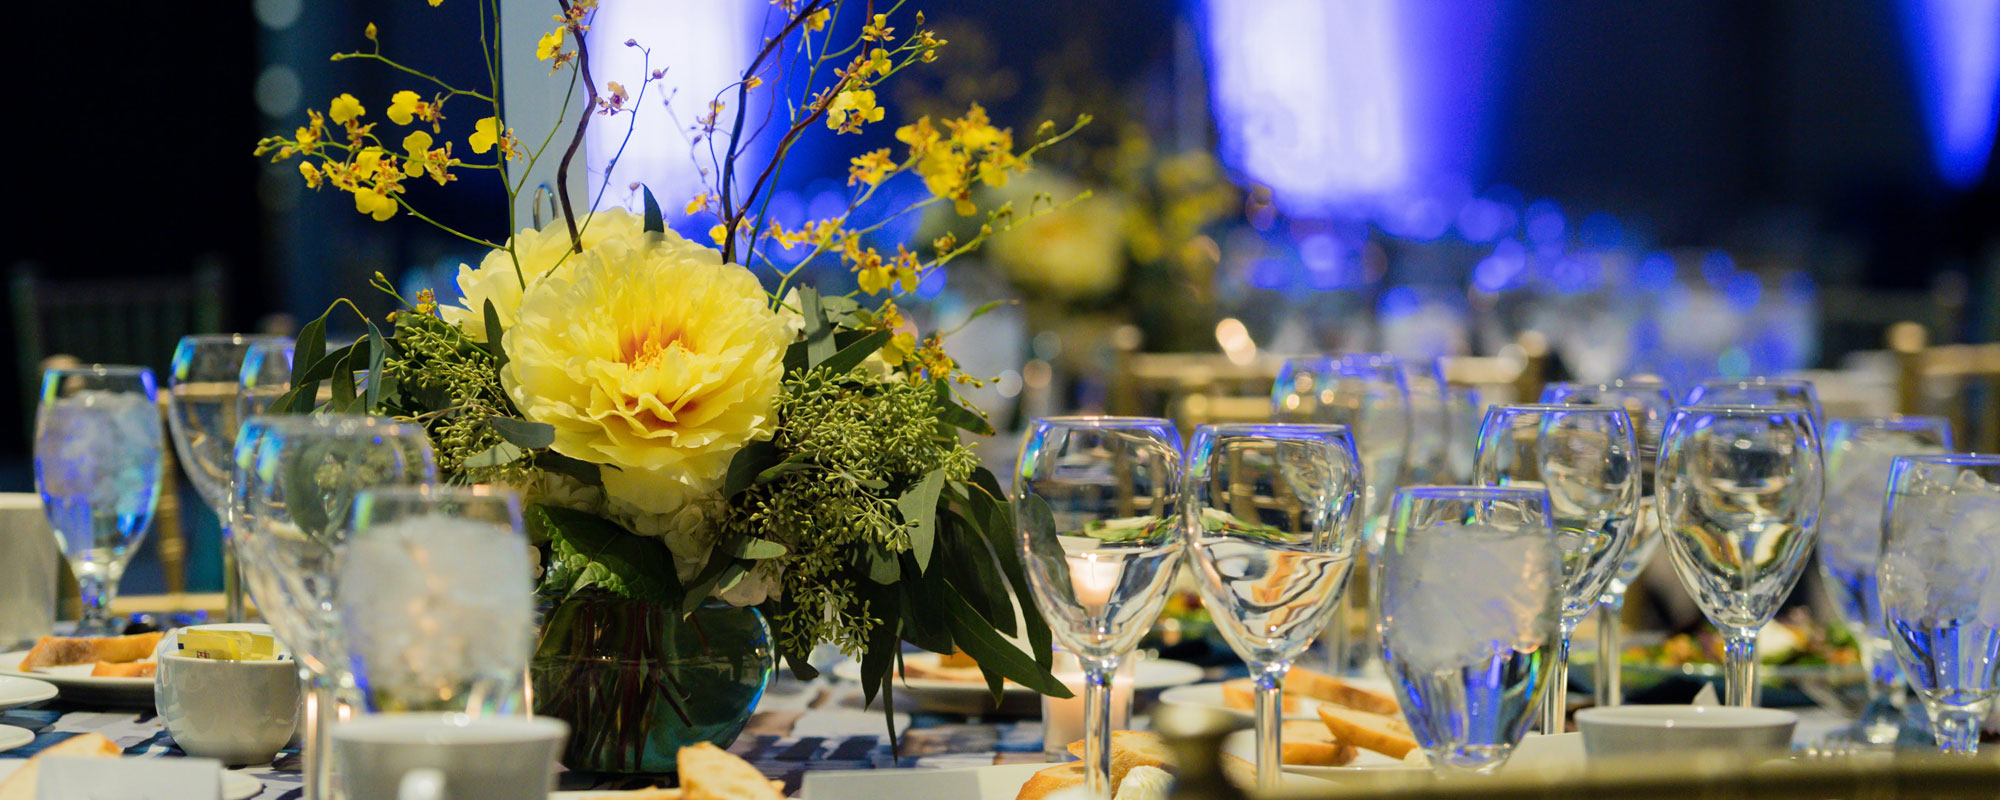 flowers, vases, glasses, and silverware on a tablecloth at a wedding